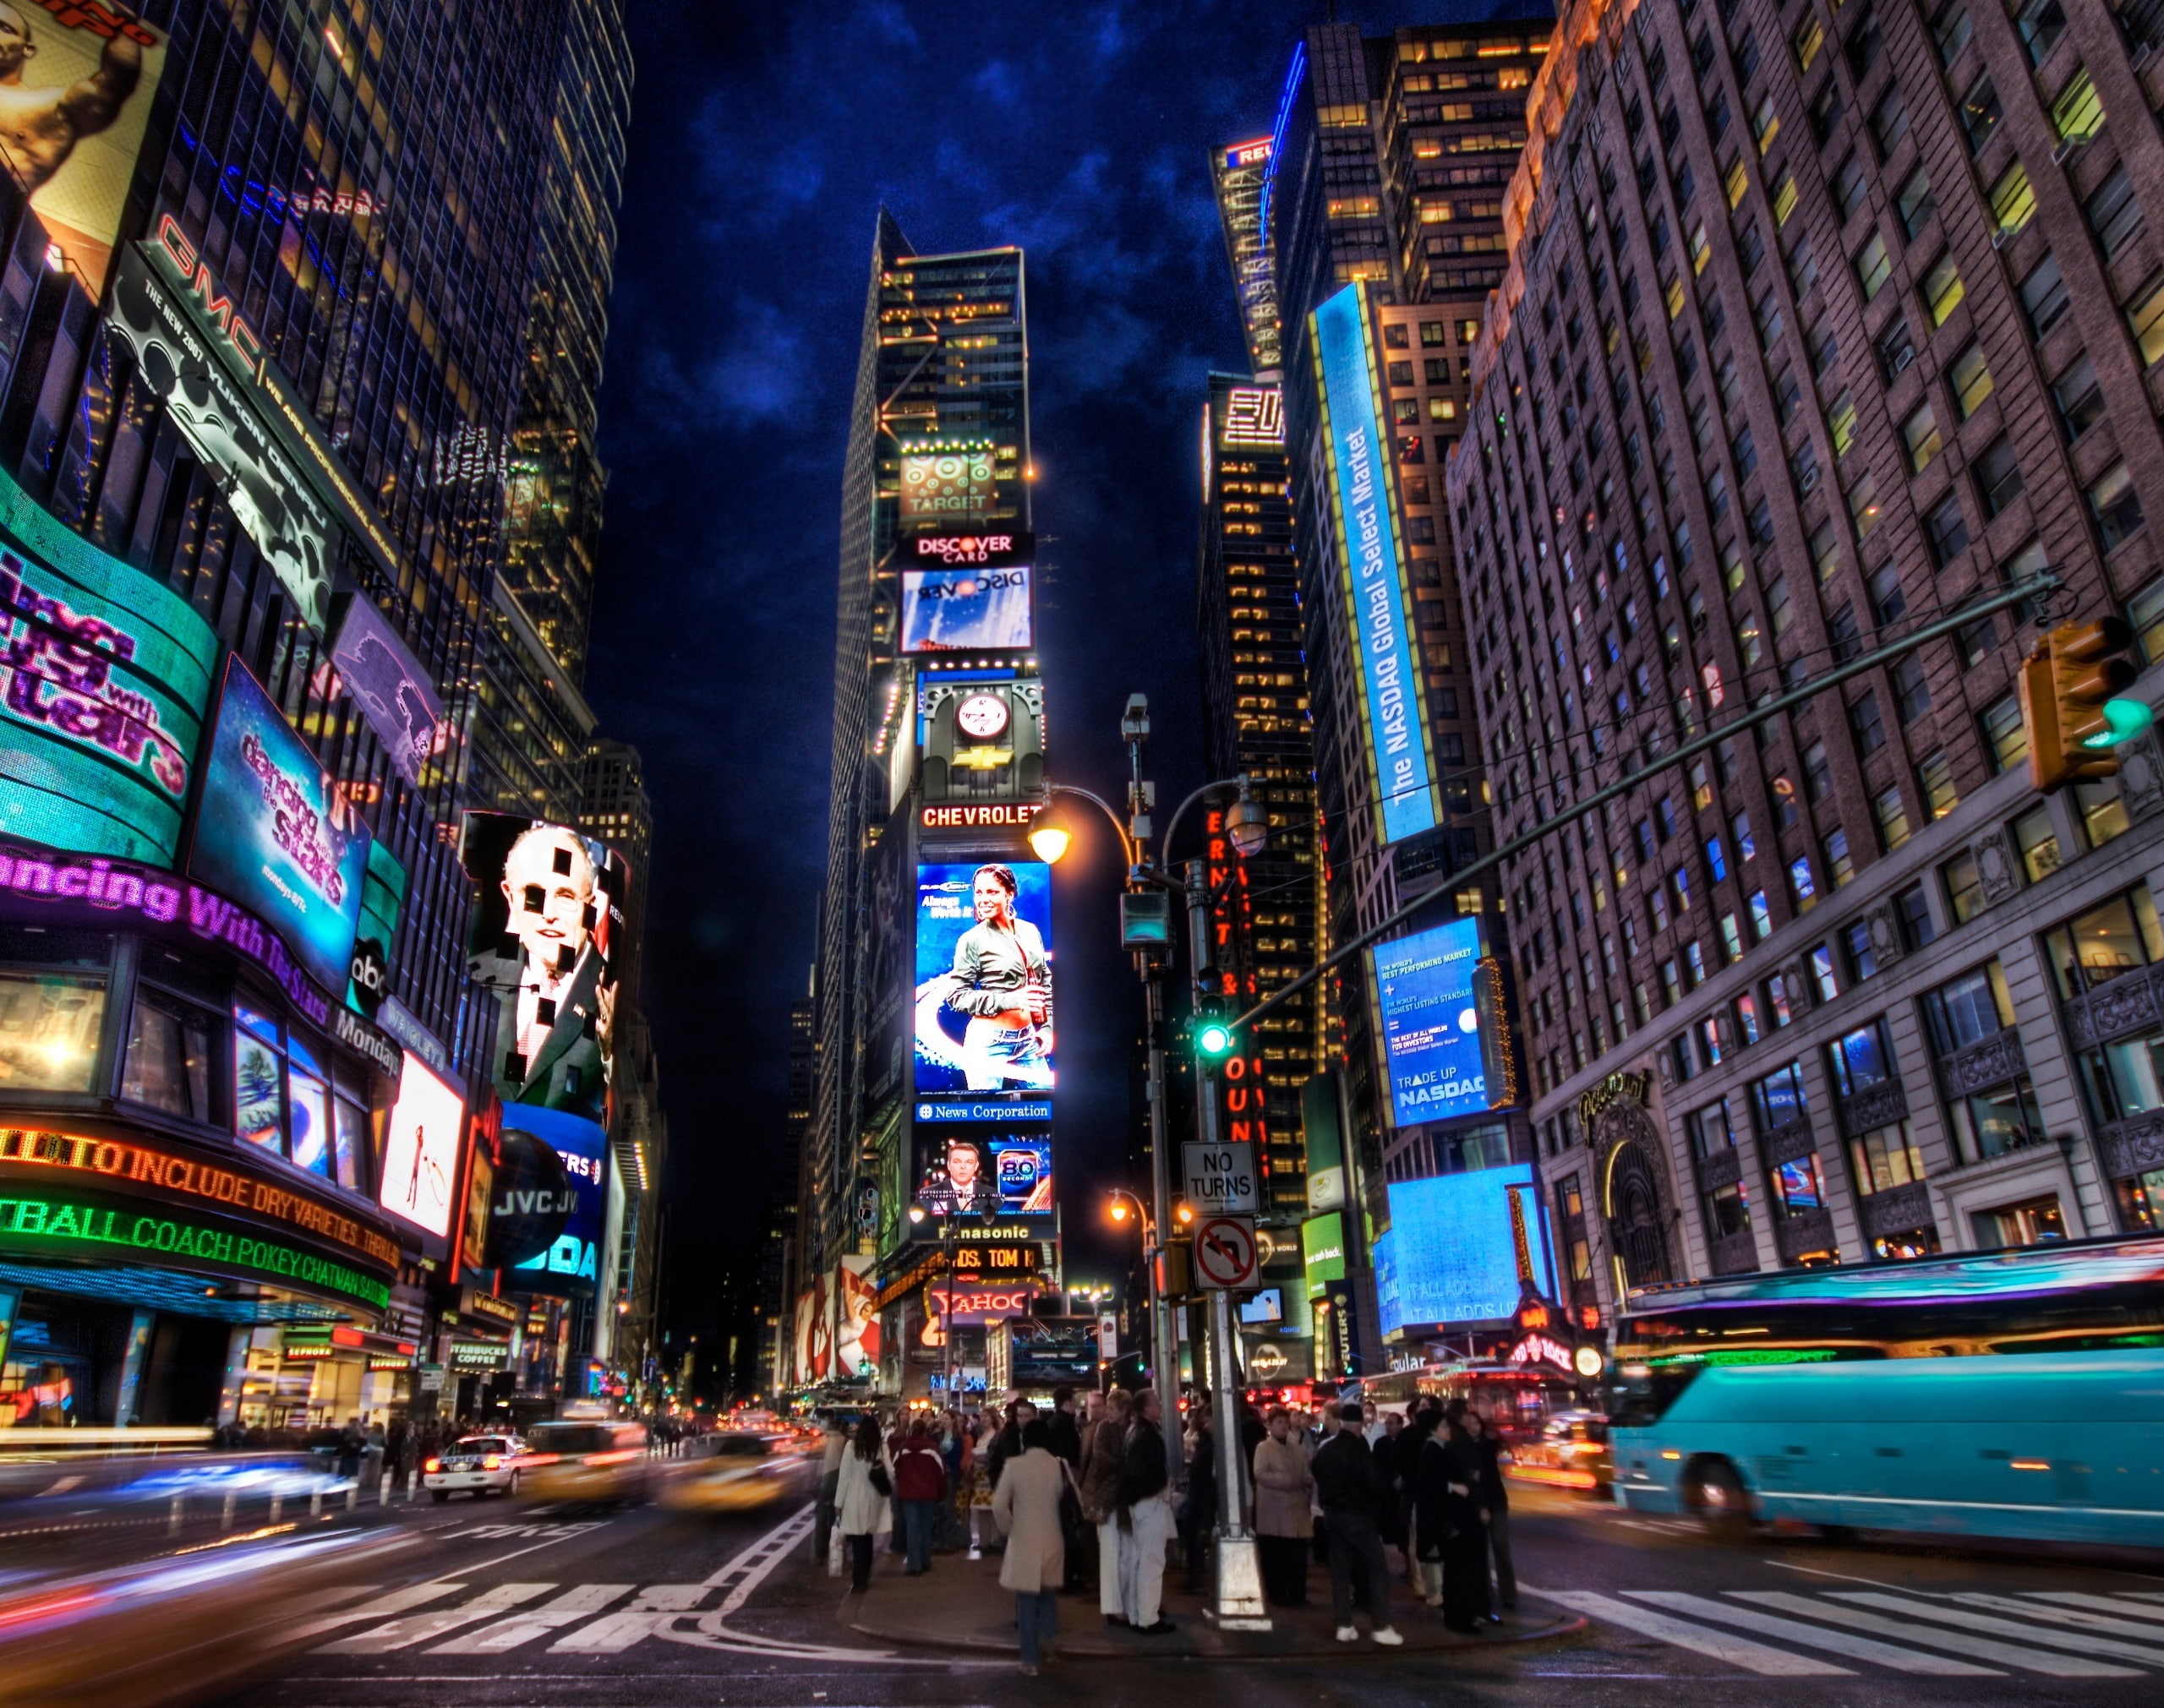 Times Square At Night, New York Times Square, City, United States/New York